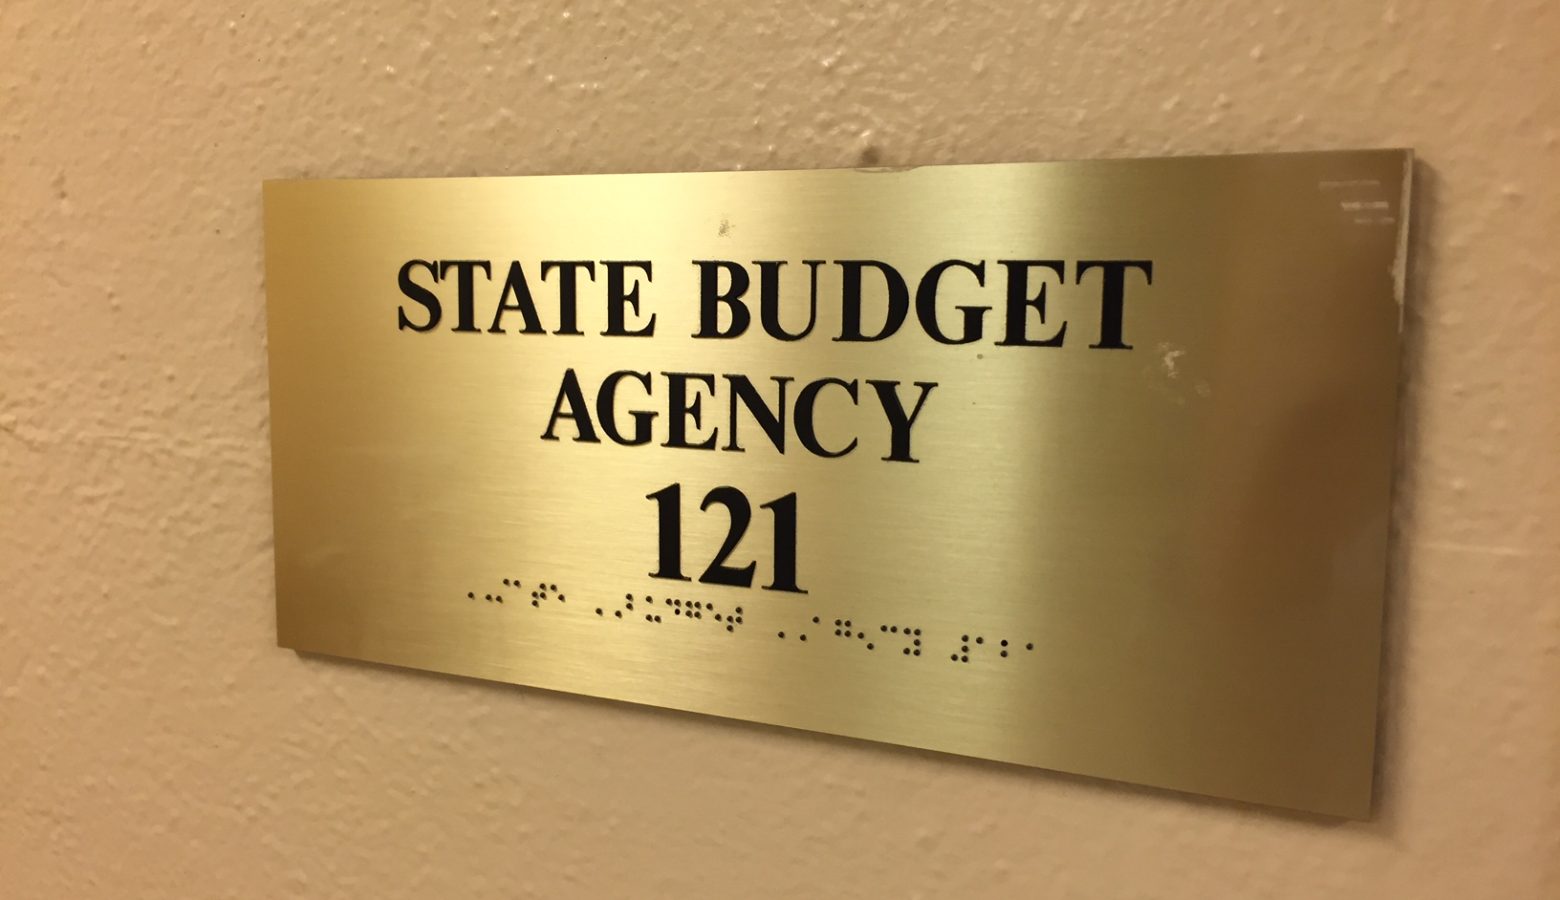 State Budget Agency offices at the Statehouse (Brandon Smith/IPB News)